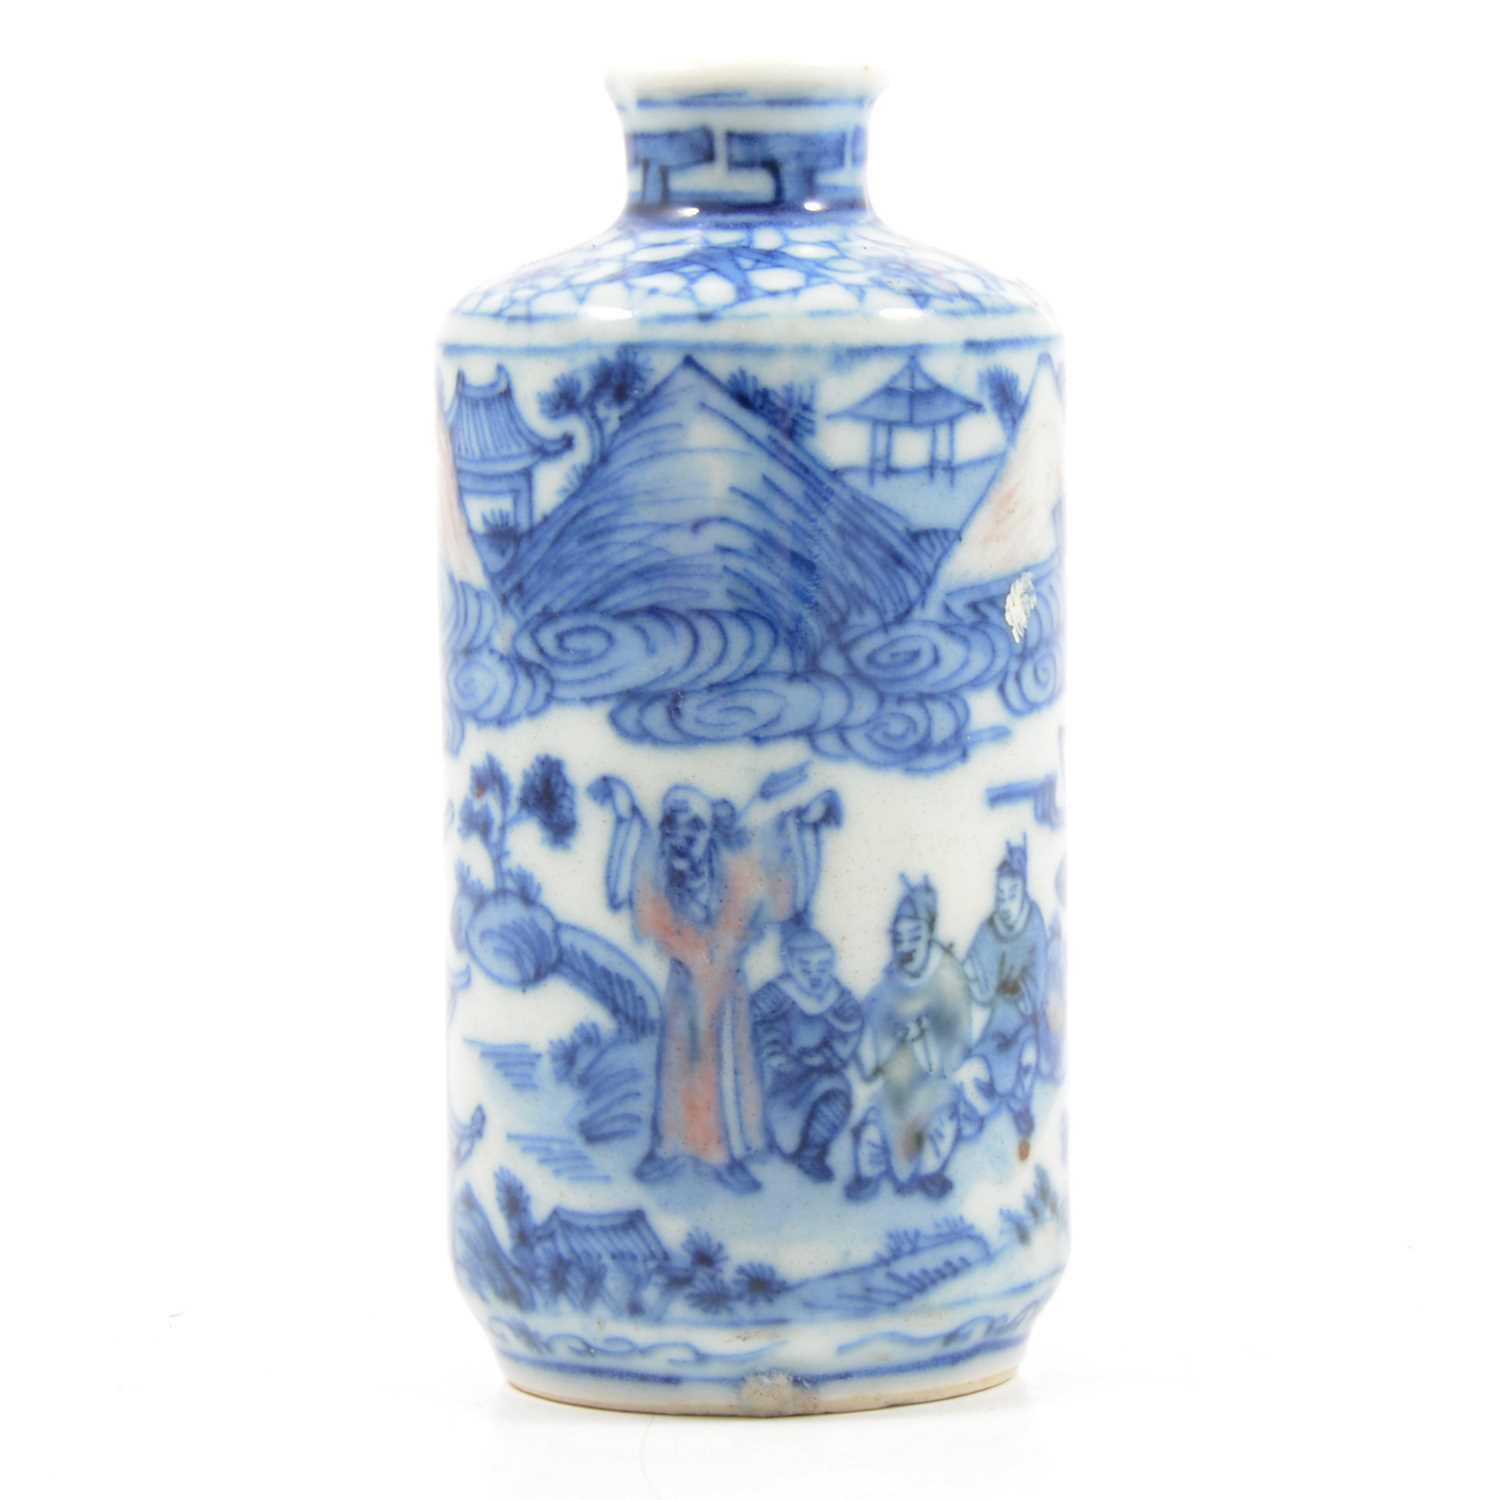 Lot 12 - Chinese blue and white porcelain scent bottle